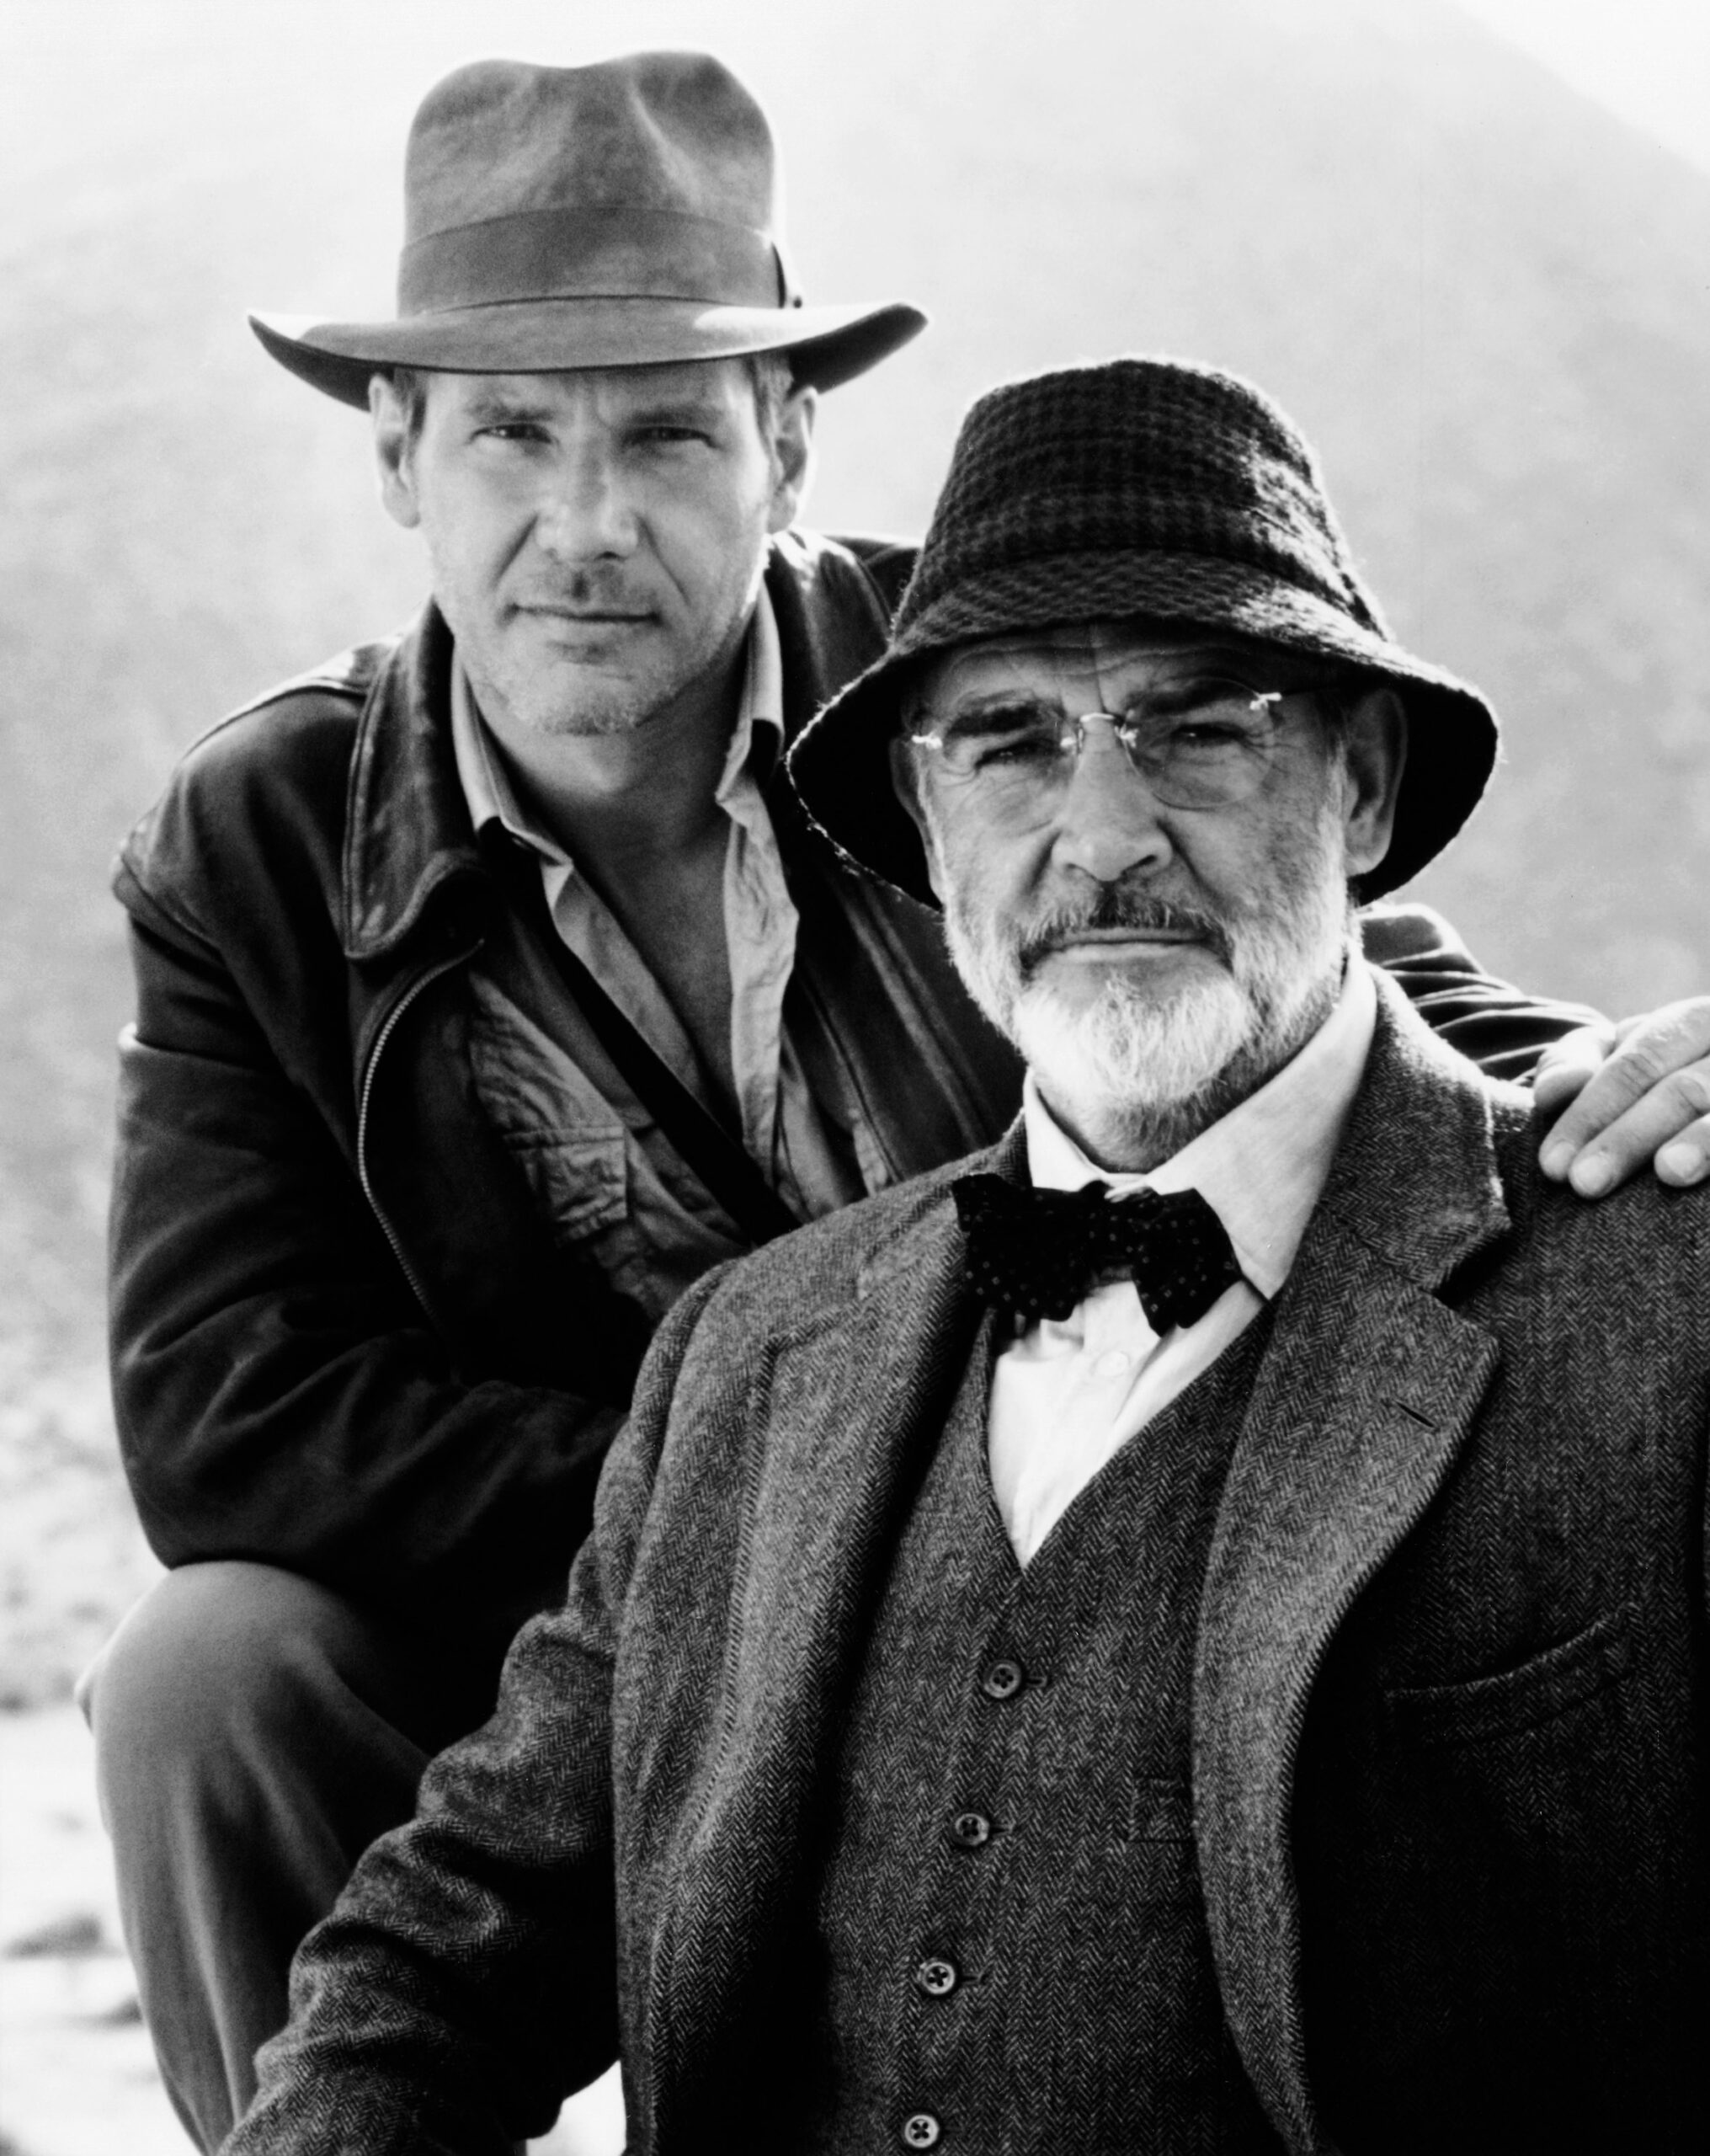 Harrison Ford Remembers Fun Friendship With 'Indiana Jones' Co-Star Sean Connery